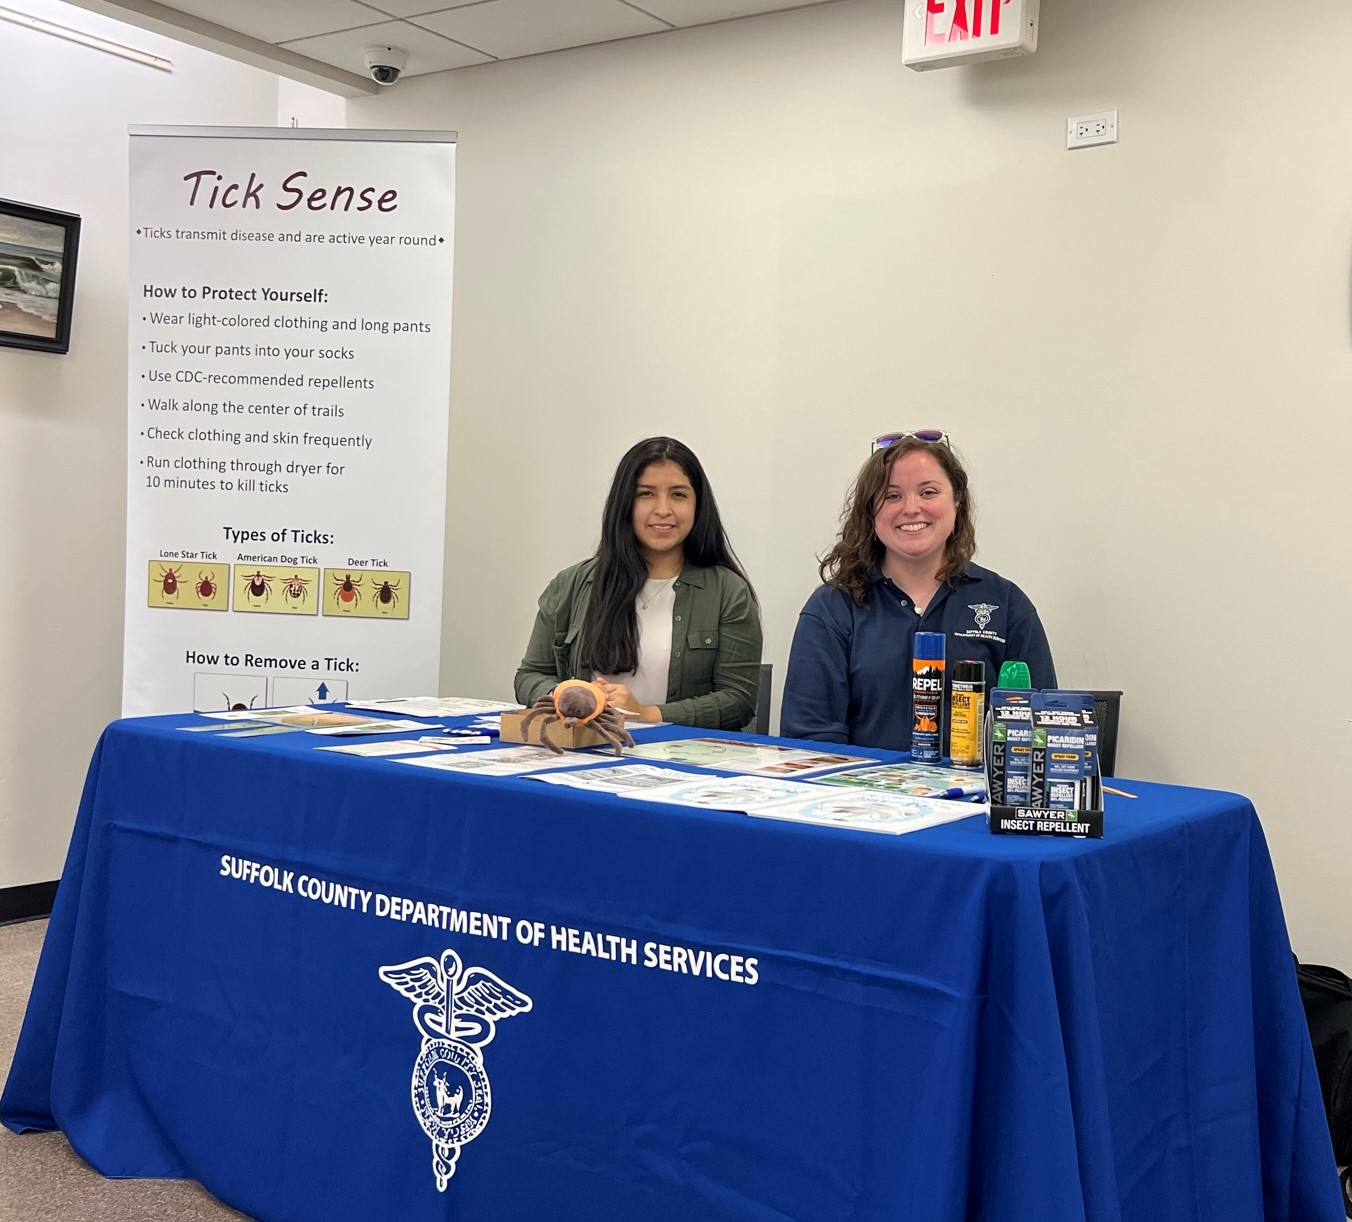 Tick Sense booth set up by suffolk county health department